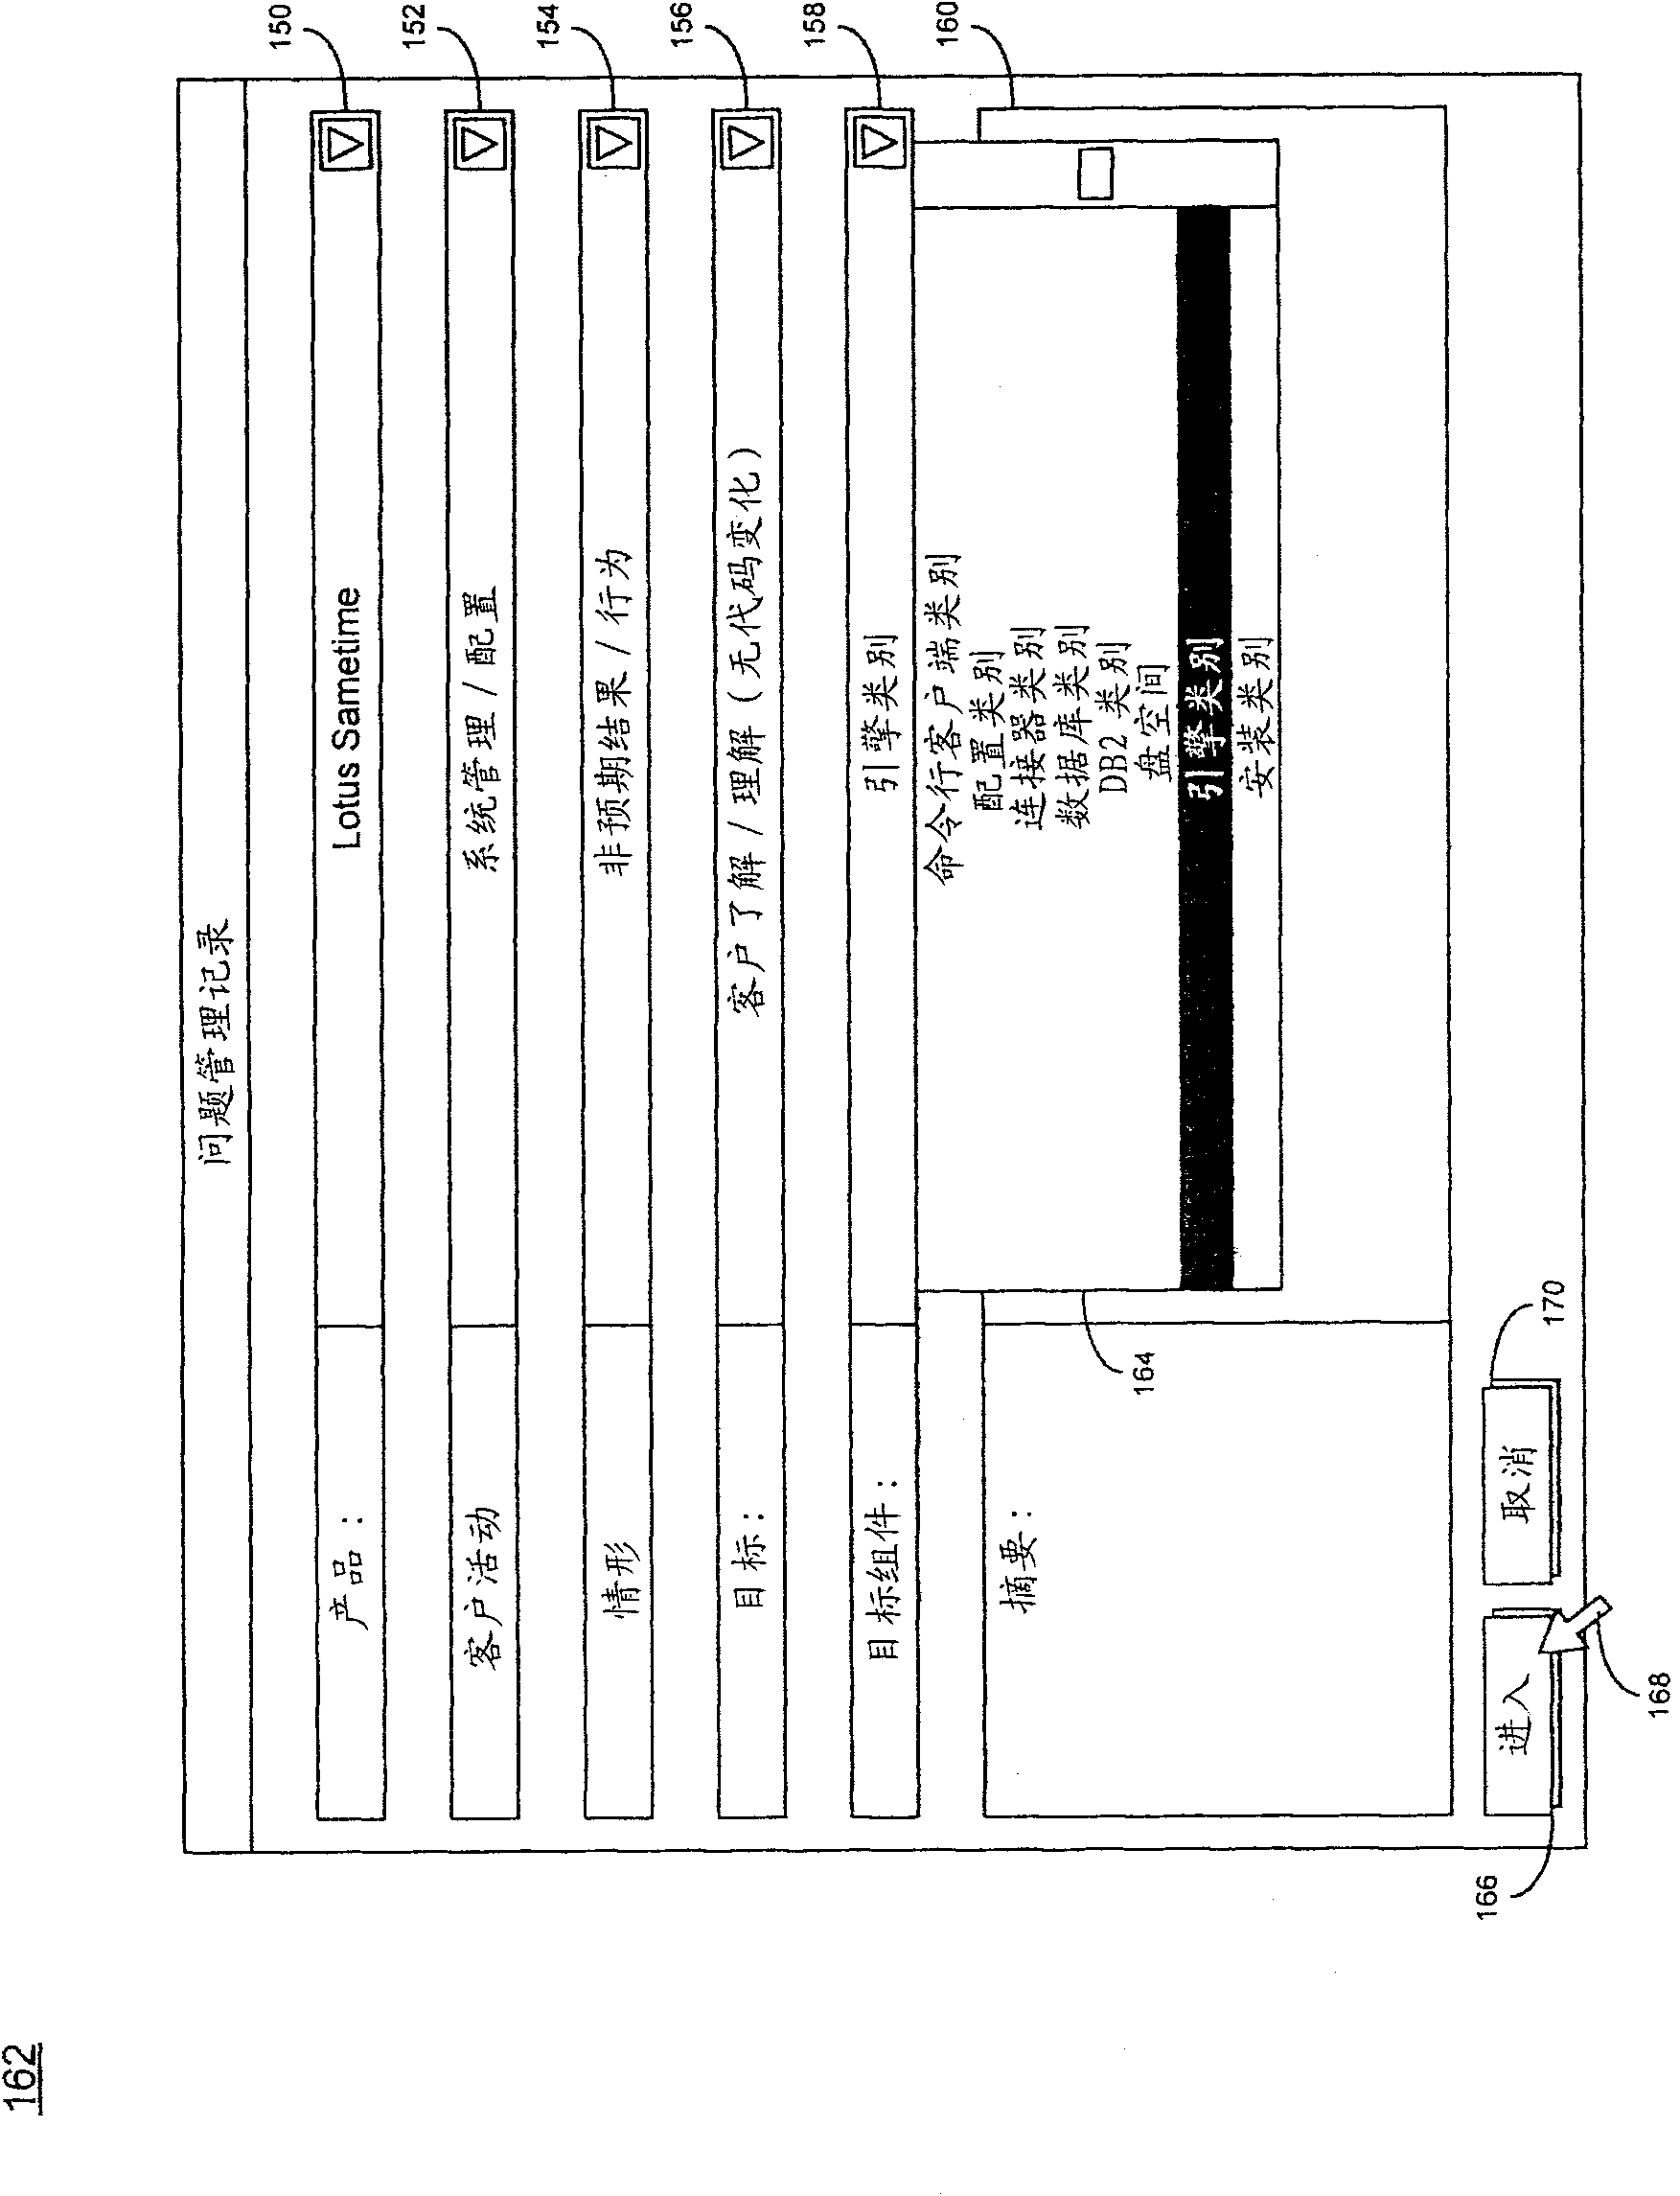 Data analysis system and method